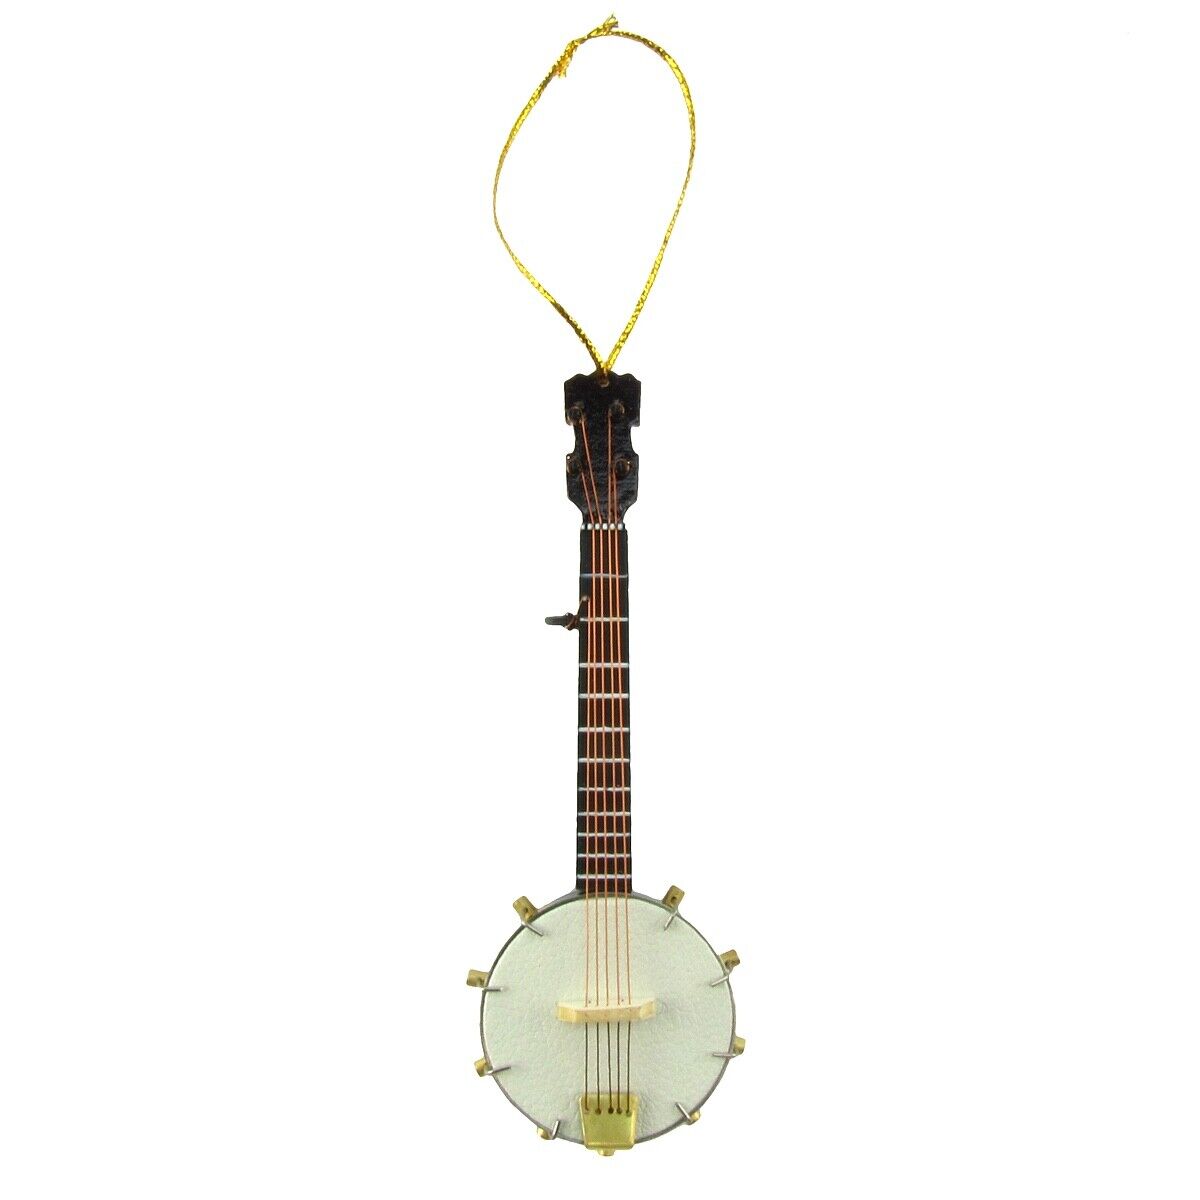 Miniature Banjo Musical Instrument Realistic Christmas Tree Ornament/Gift Topper